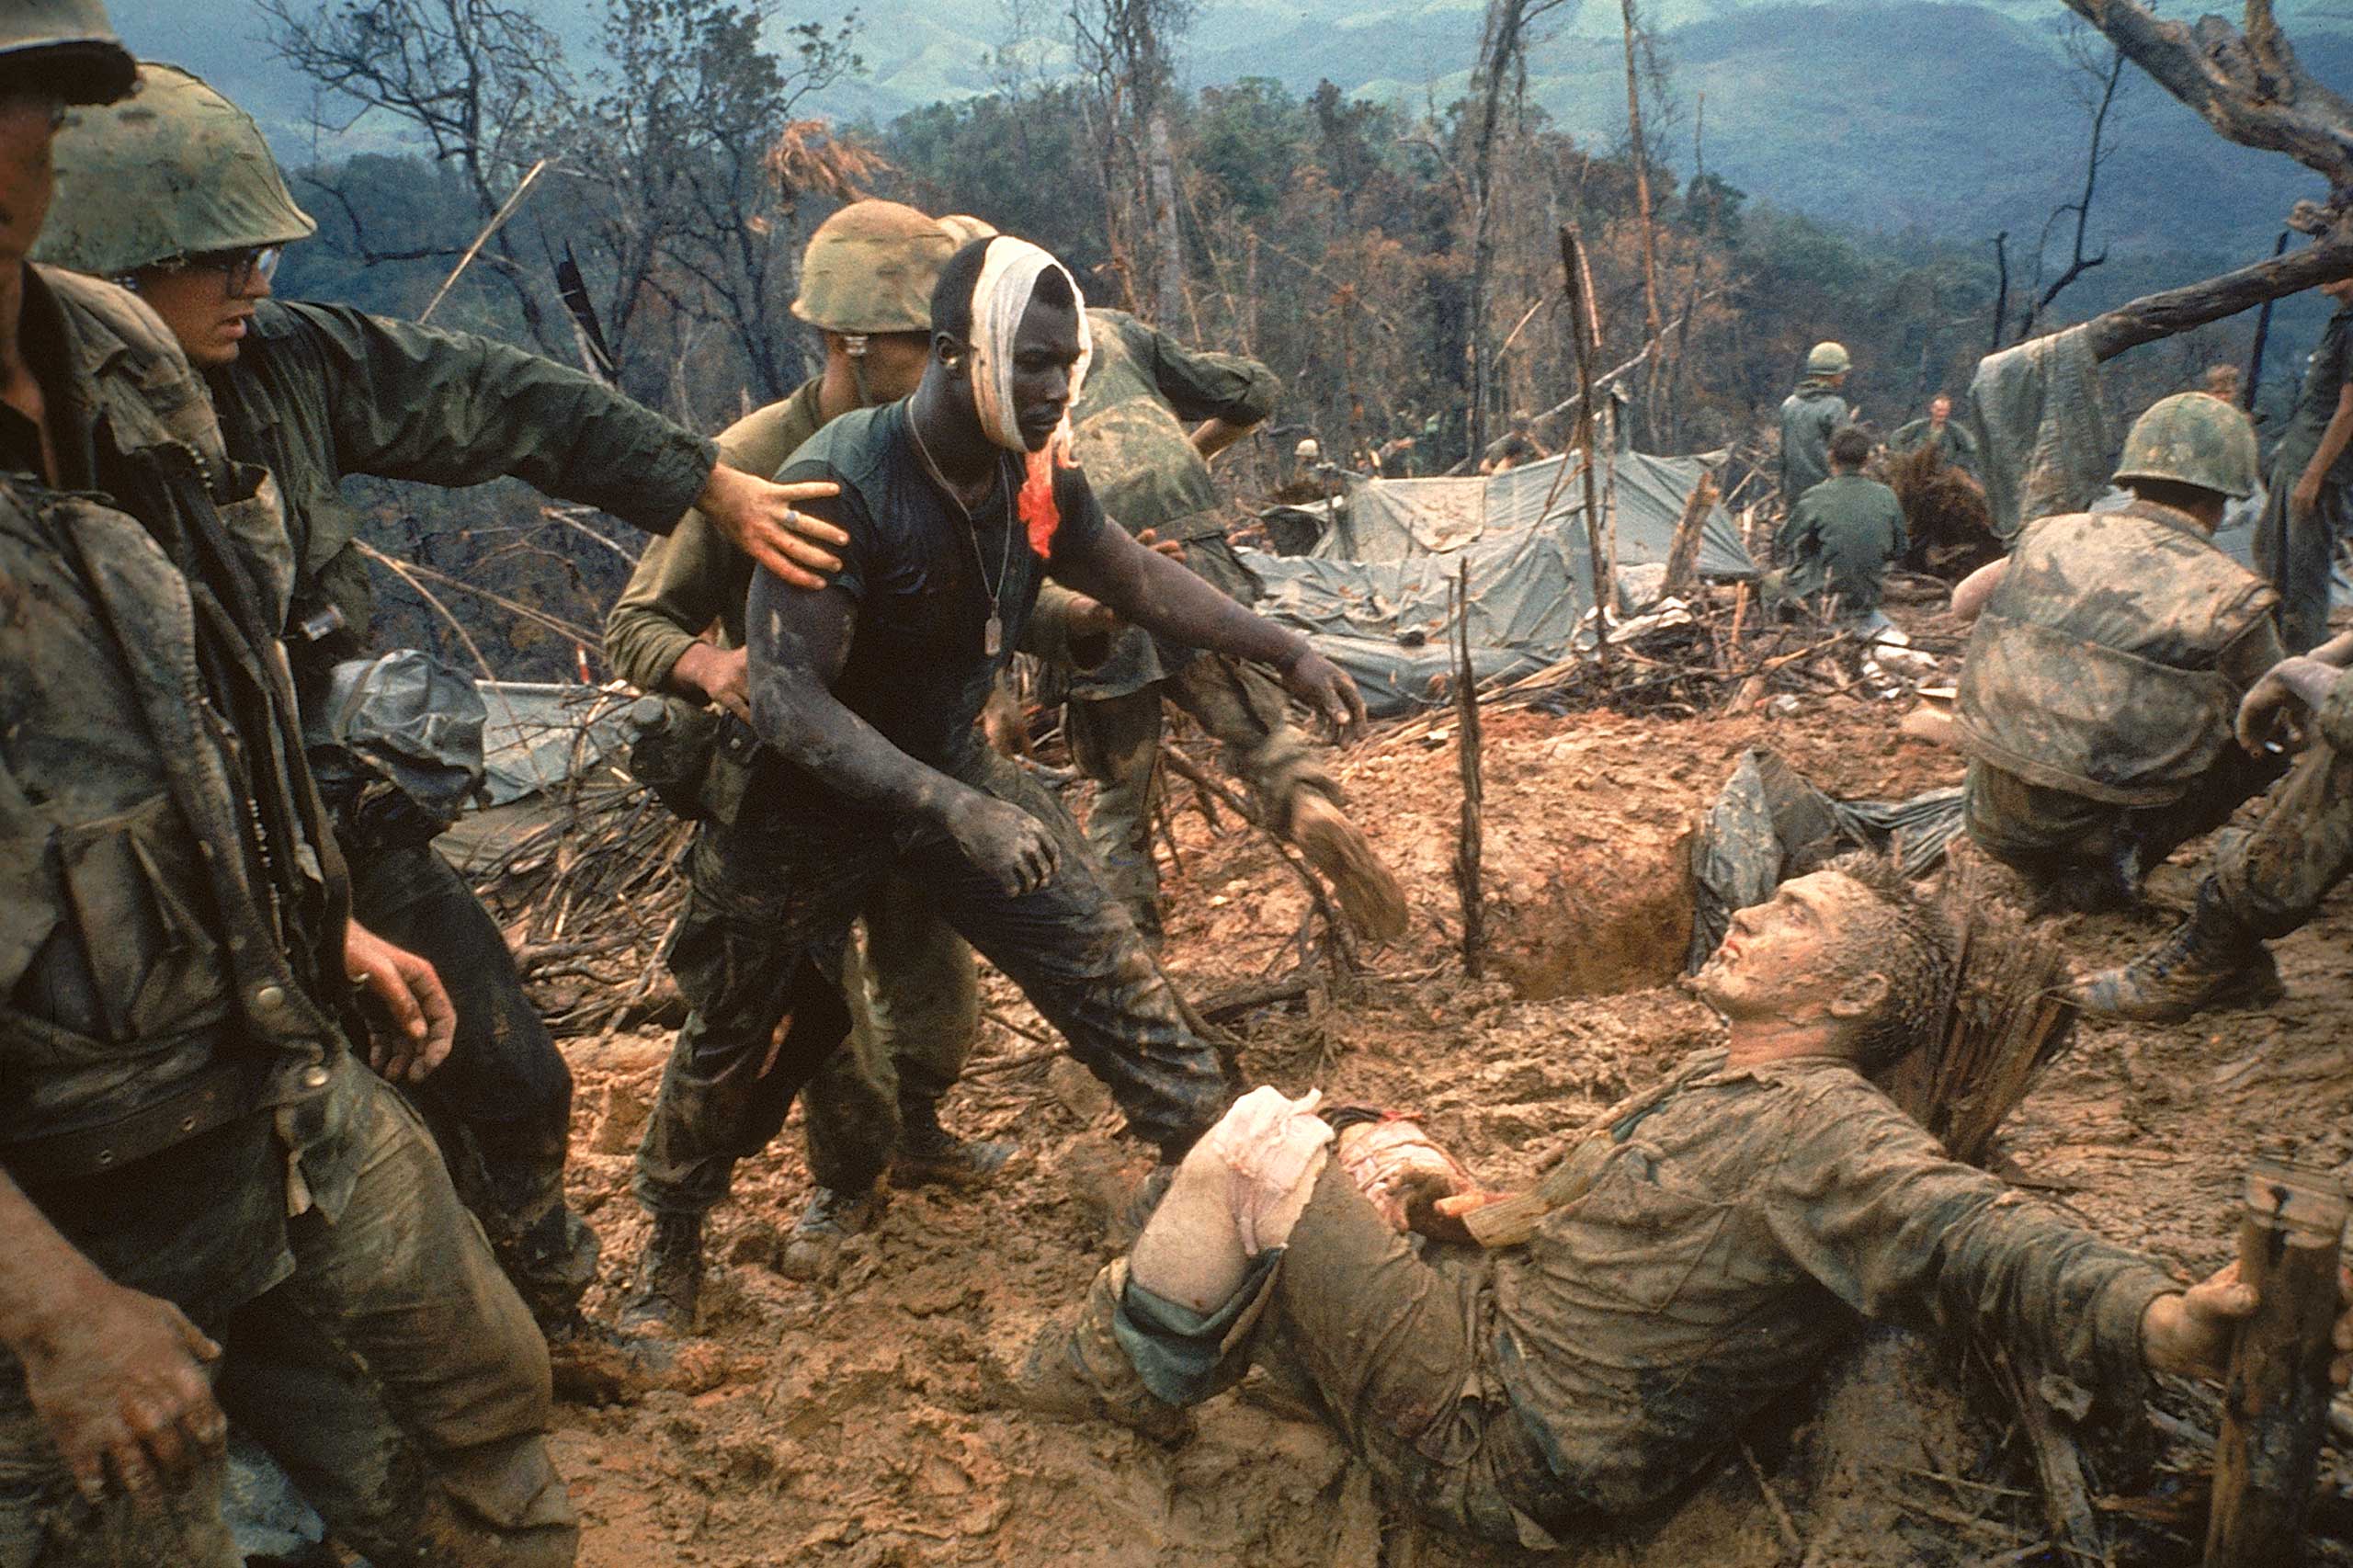 1966 | Wounded Marine Gunnery Sgt. Jeremiah Purdie (center) moves to try and comfort a stricken comrade after a fierce firefight during the Vietnam War. Photographed for an essay that ran in the October 28, 1966, issue of LIFE, this Larry Burrows picture — now regarded as one of the handful of utterly indispensable images from the war — did not appear in the magazine until February 1971.